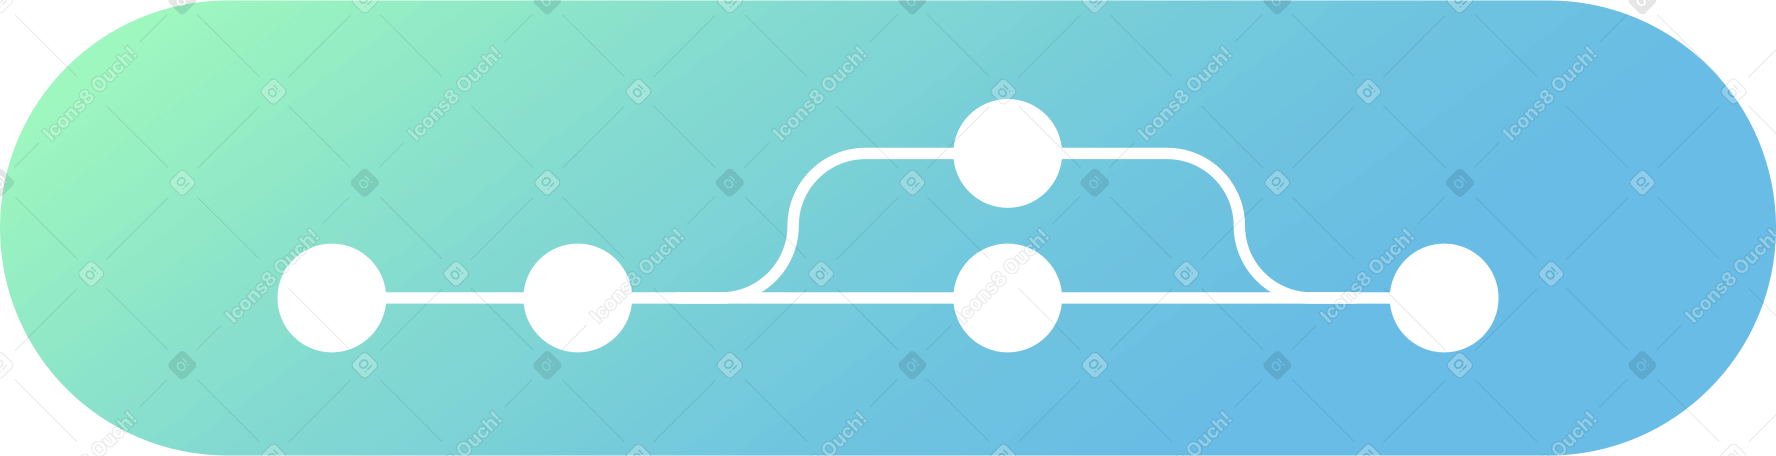 repository graph Illustration in PNG, SVG